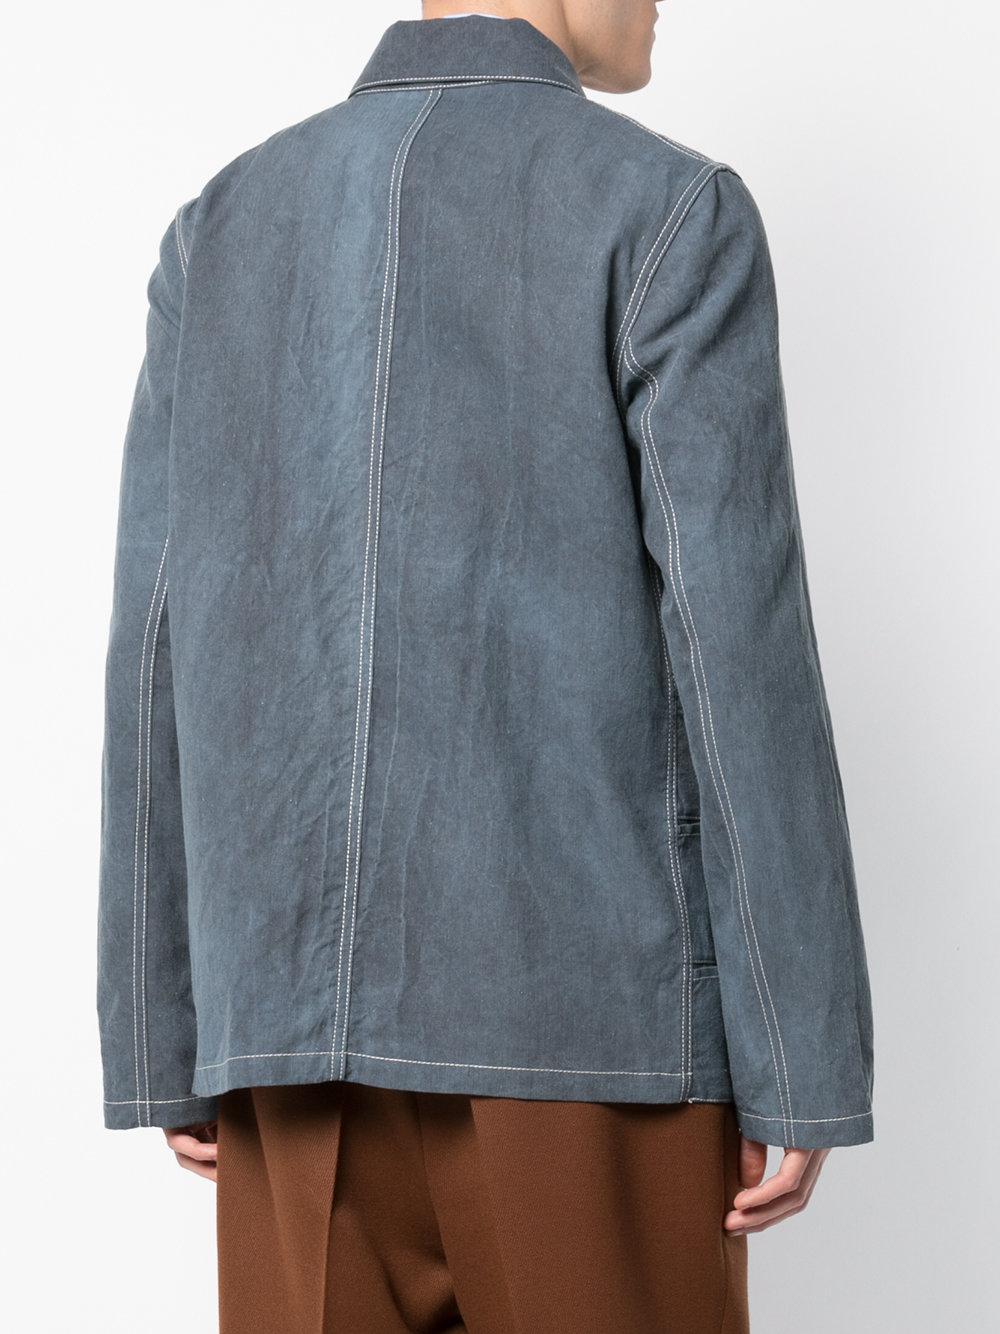 Loewe Leather Brand Letters Jacket in Blue for Men - Lyst